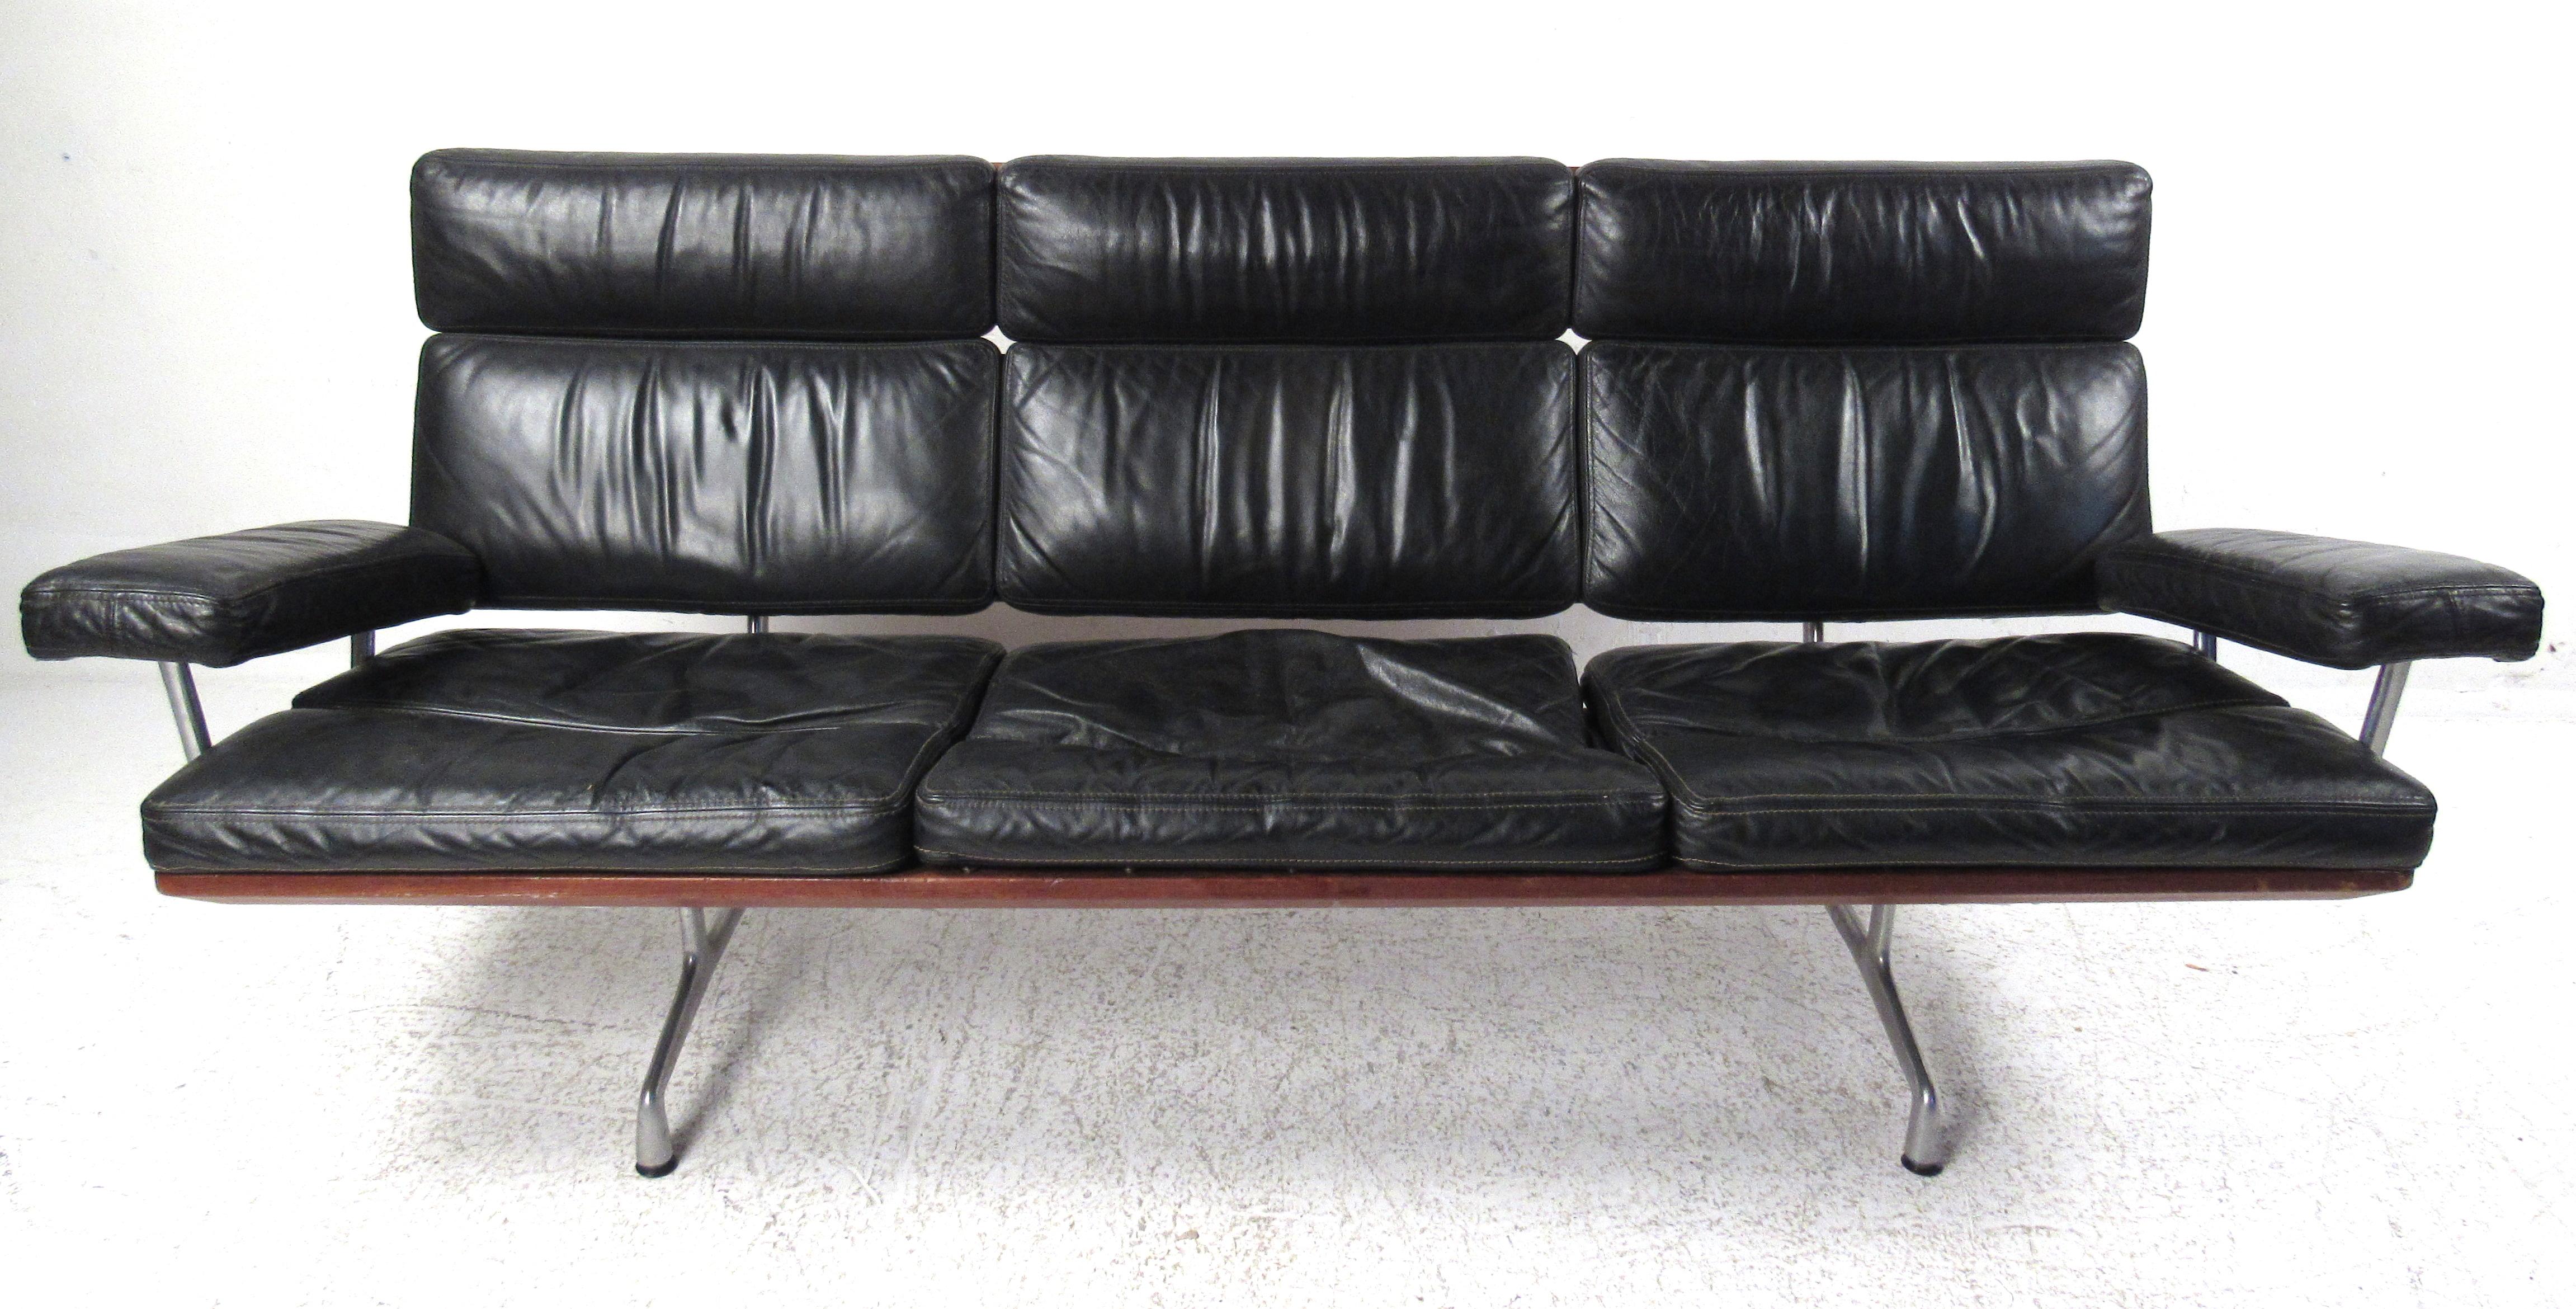 Beautiful three-seat sofa in black leather with teak and aluminum frame by Charles and Ray Eames. Conceived in 1967, it was later put into production in 1984 and was the last furniture design from the Eames office. Please confirm item location (NY